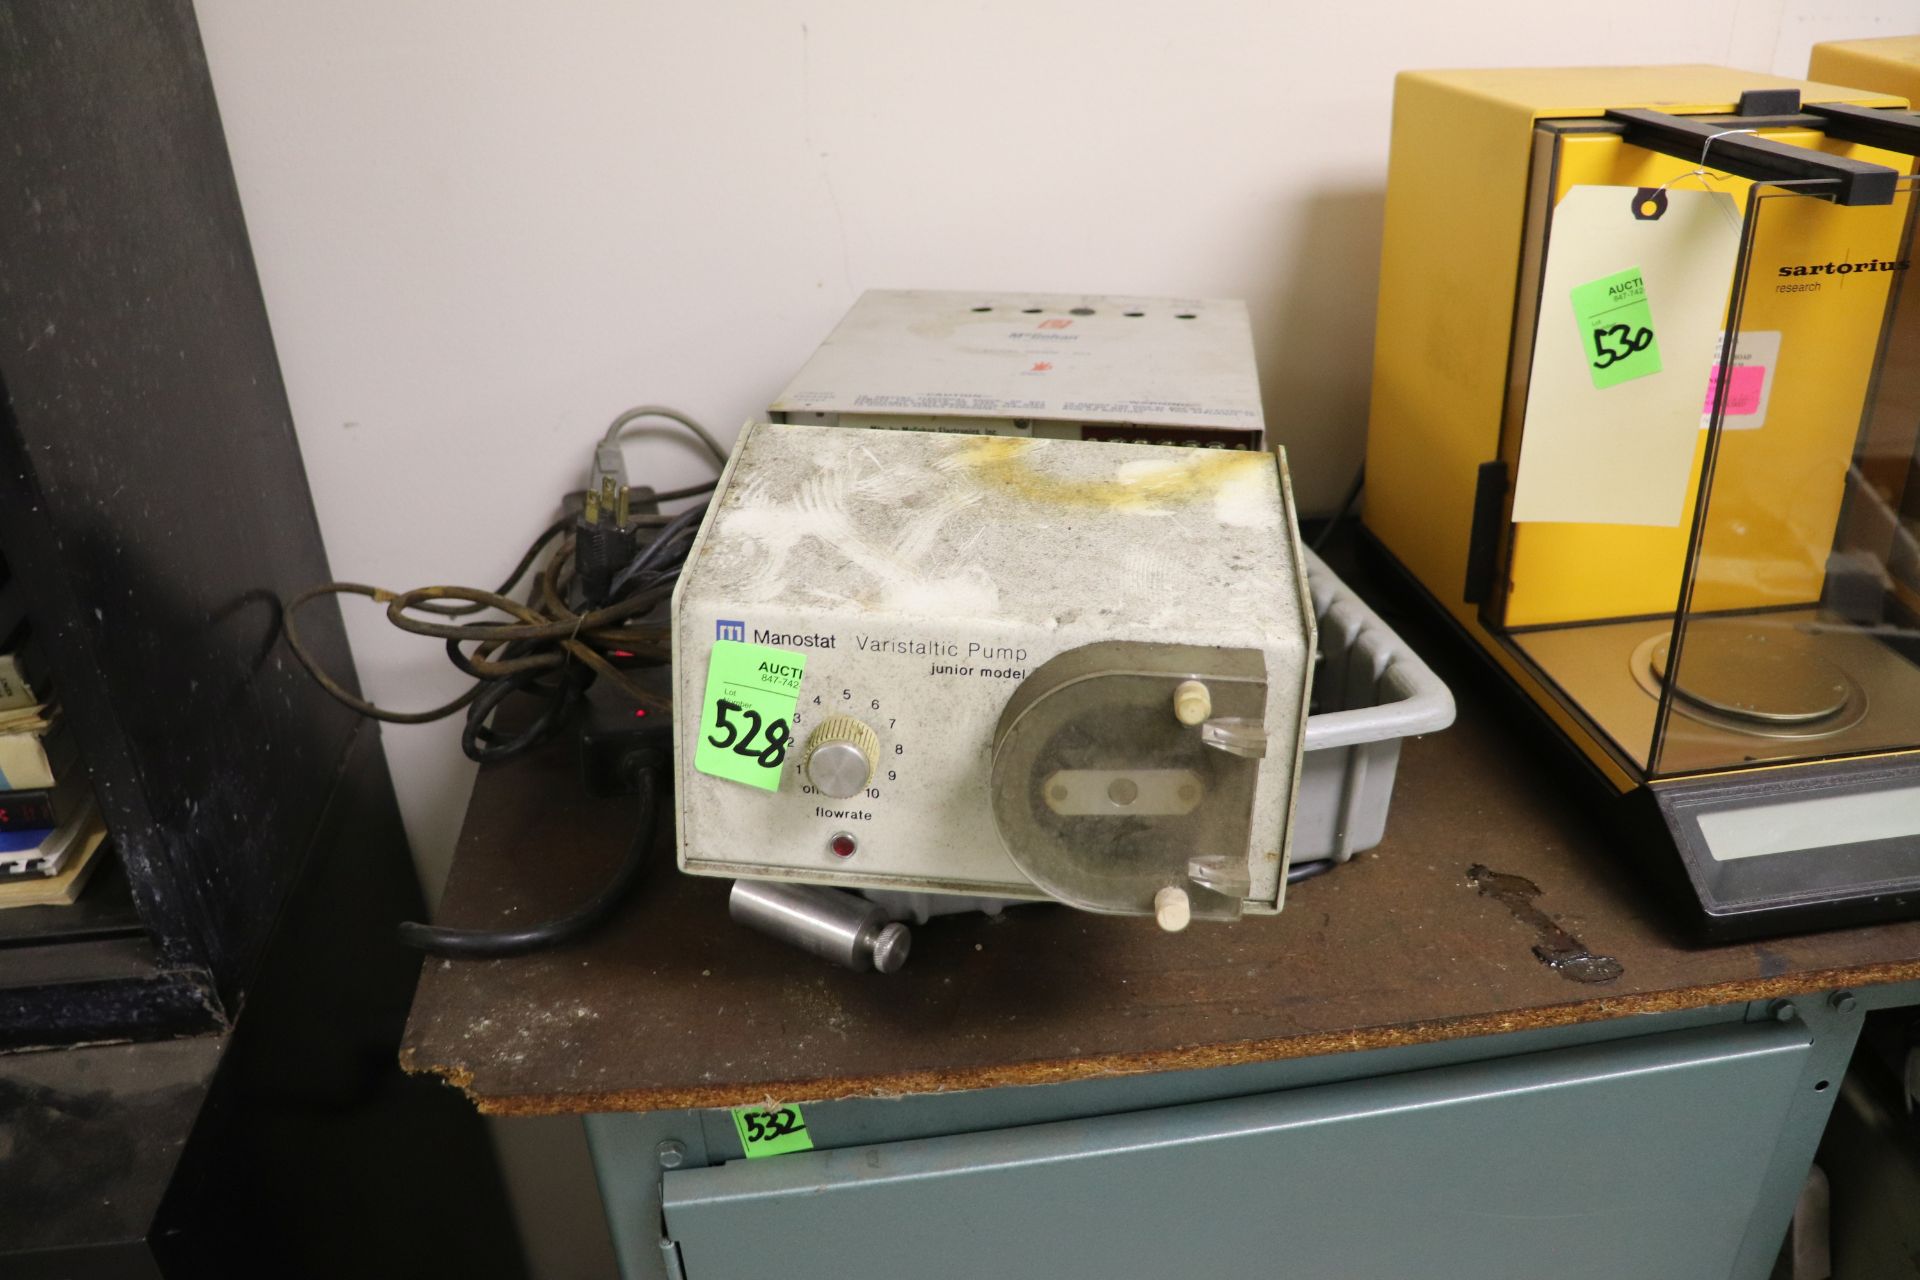 Manostat Varistaltic pump, McGohan model MSWN-203, and a Realistic amplifier, model MPA-20